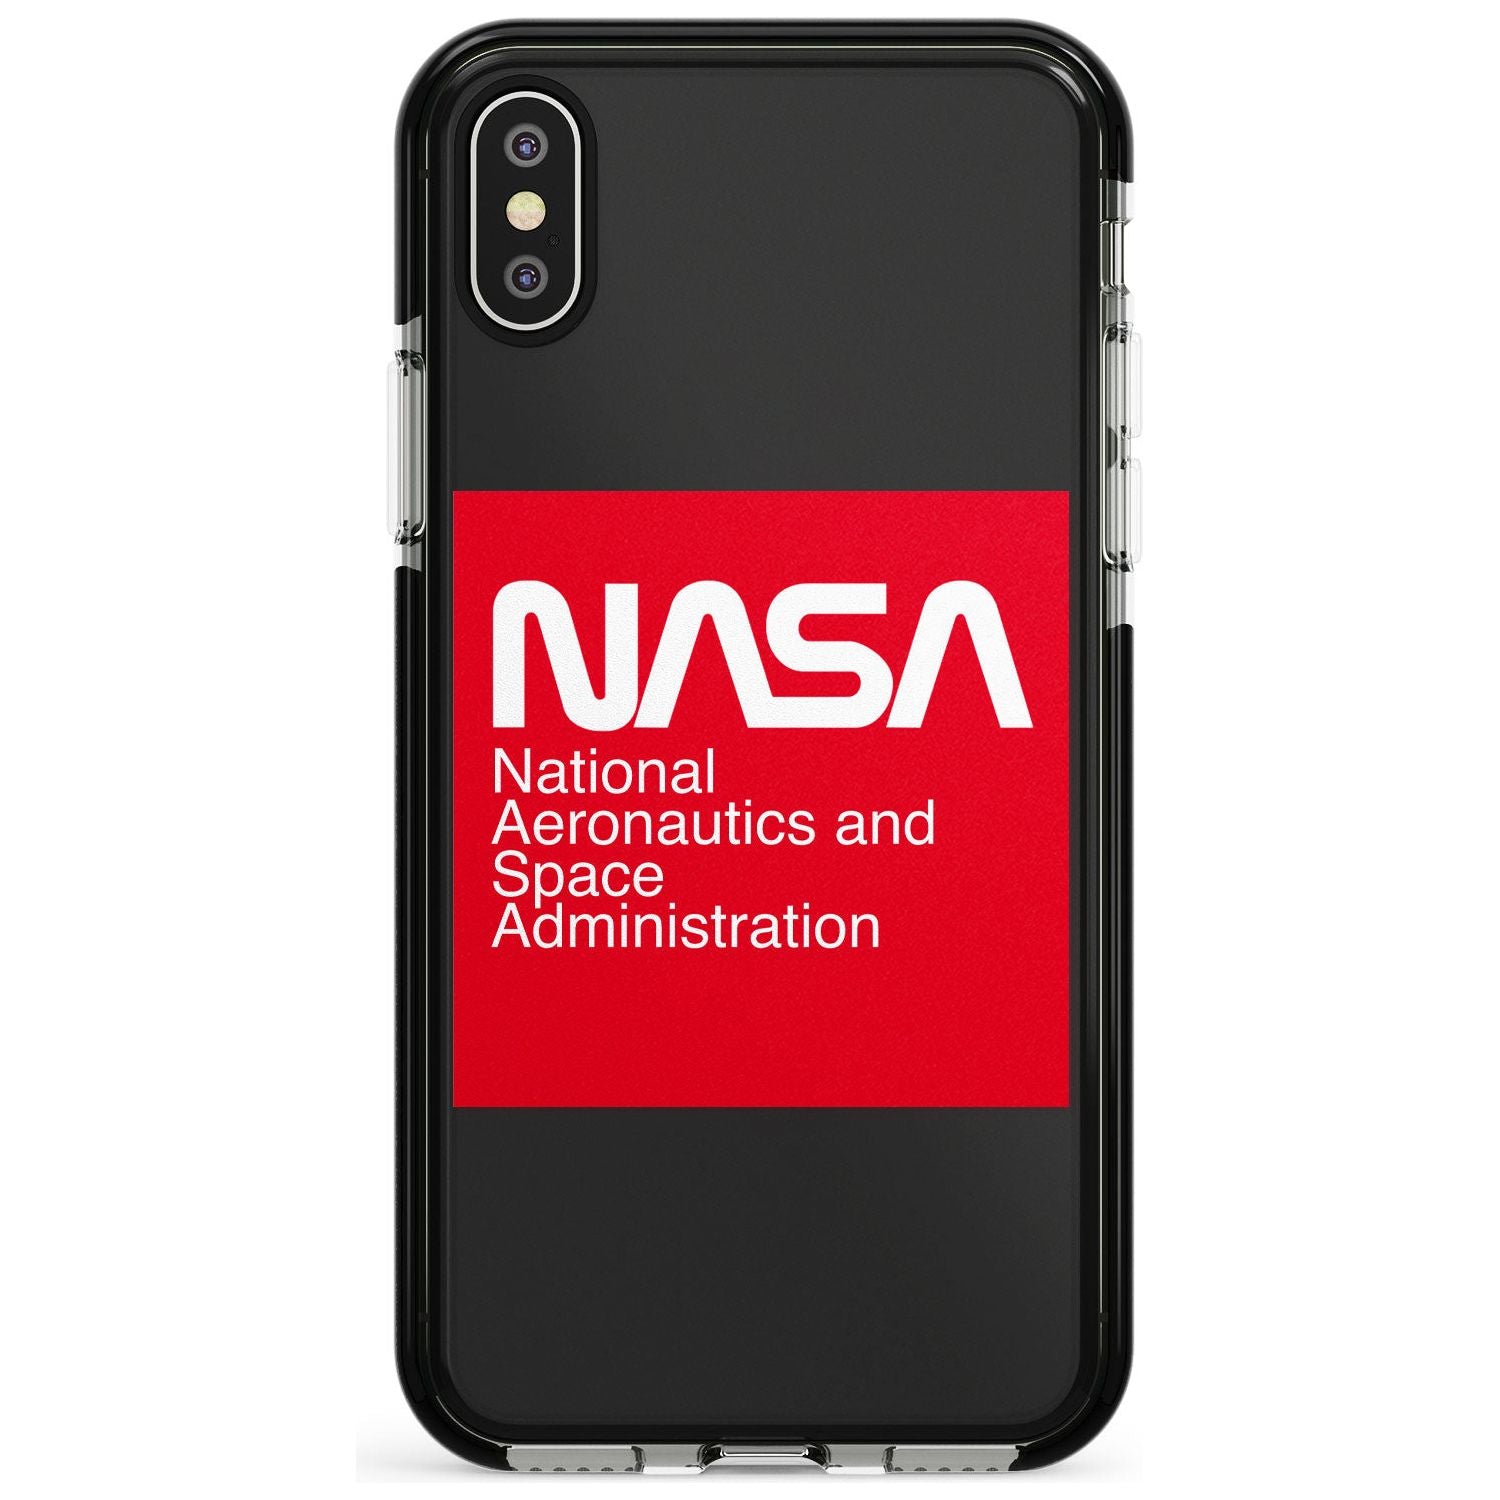 NASA The Worm Box Black Impact Phone Case for iPhone X XS Max XR